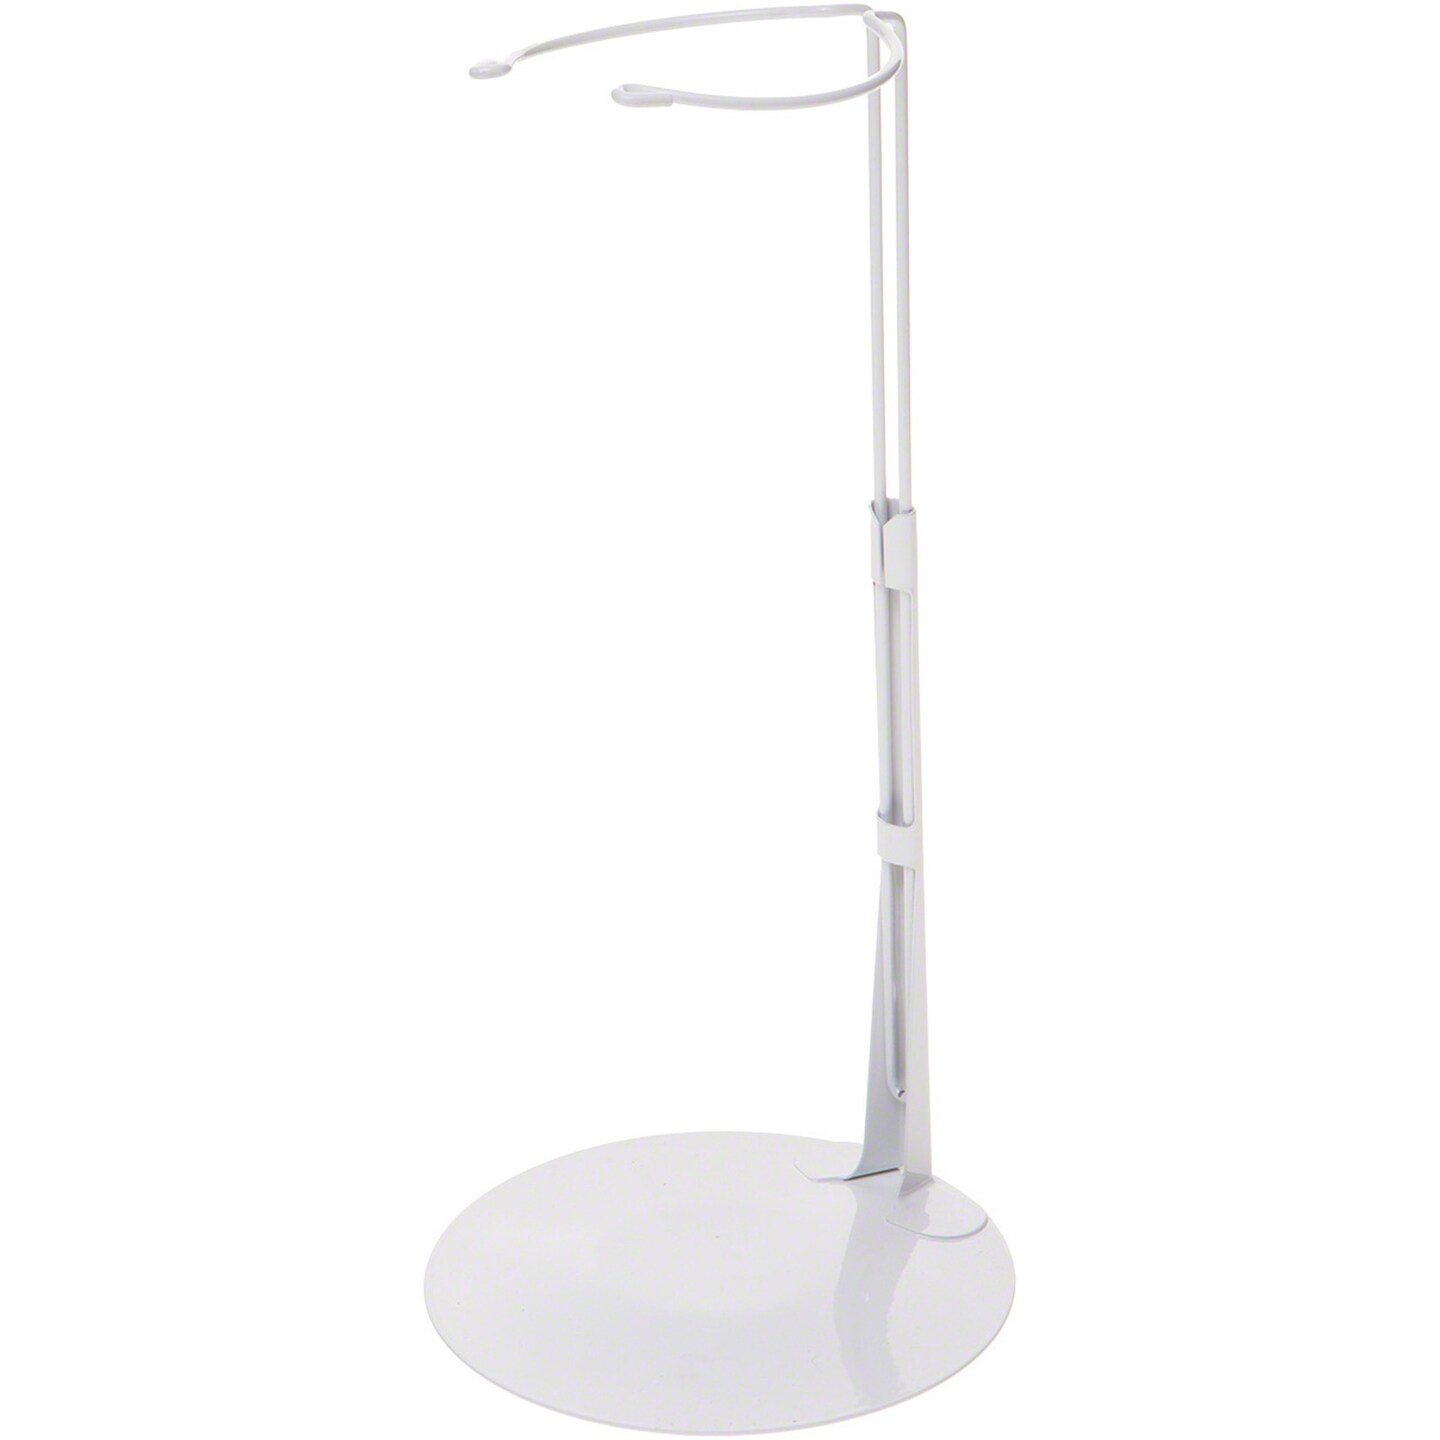 Kaiser 3501 White Adjustable Doll Stand, fits 16 to 25 inch Dolls, waist width adjusts from 4 to 4.75 inches